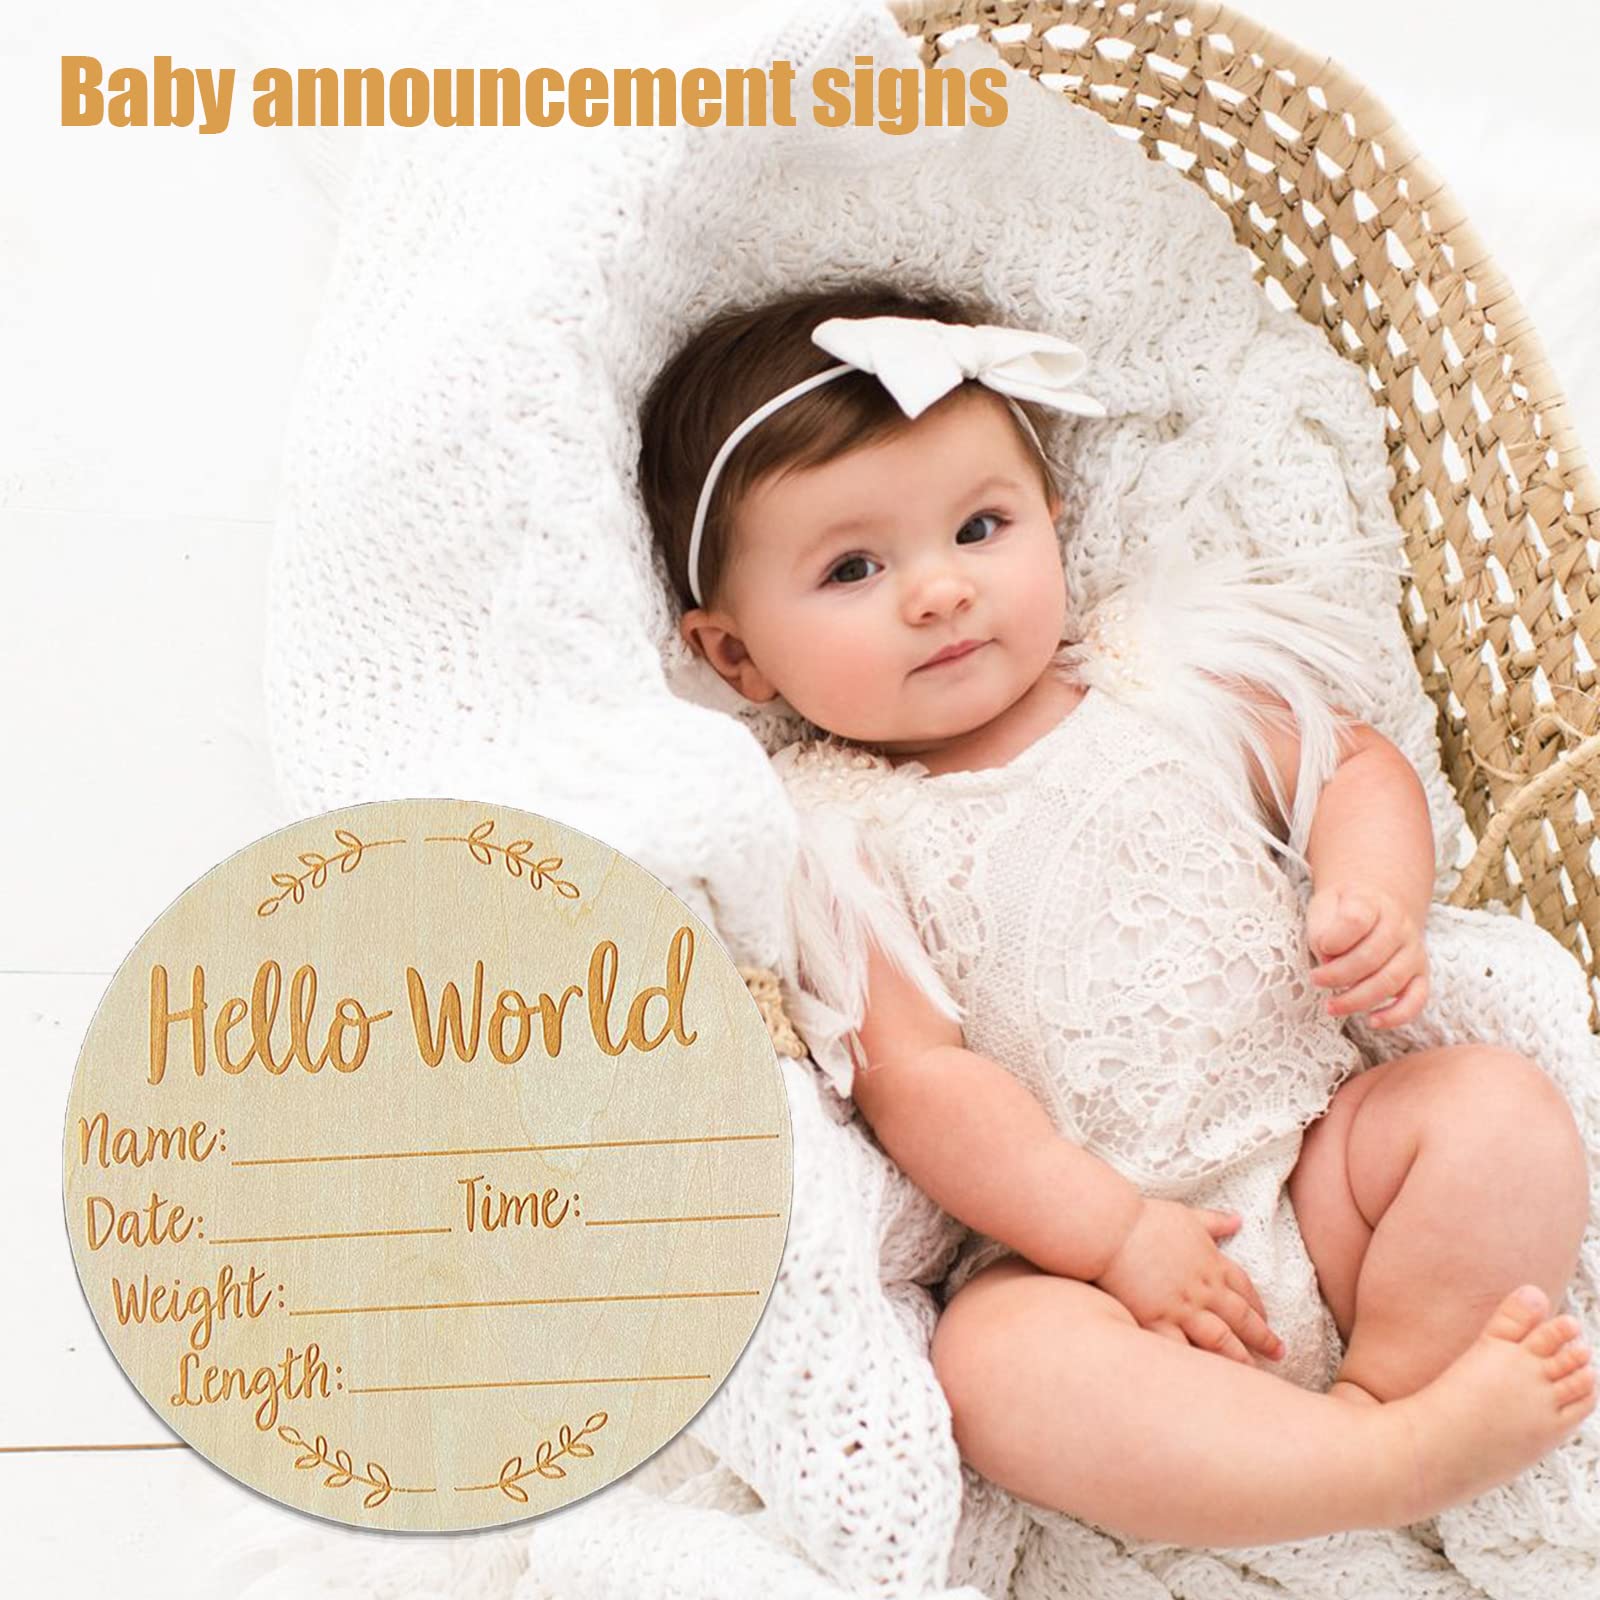 joaoxoko Hello Horld Newborn Sign，5.9 Inch Round Wooden Baby Announcement Sign for Newborn Boys and Girls，Welcome Baby Sign for Hospital Photo Prop Gift (Leaf)